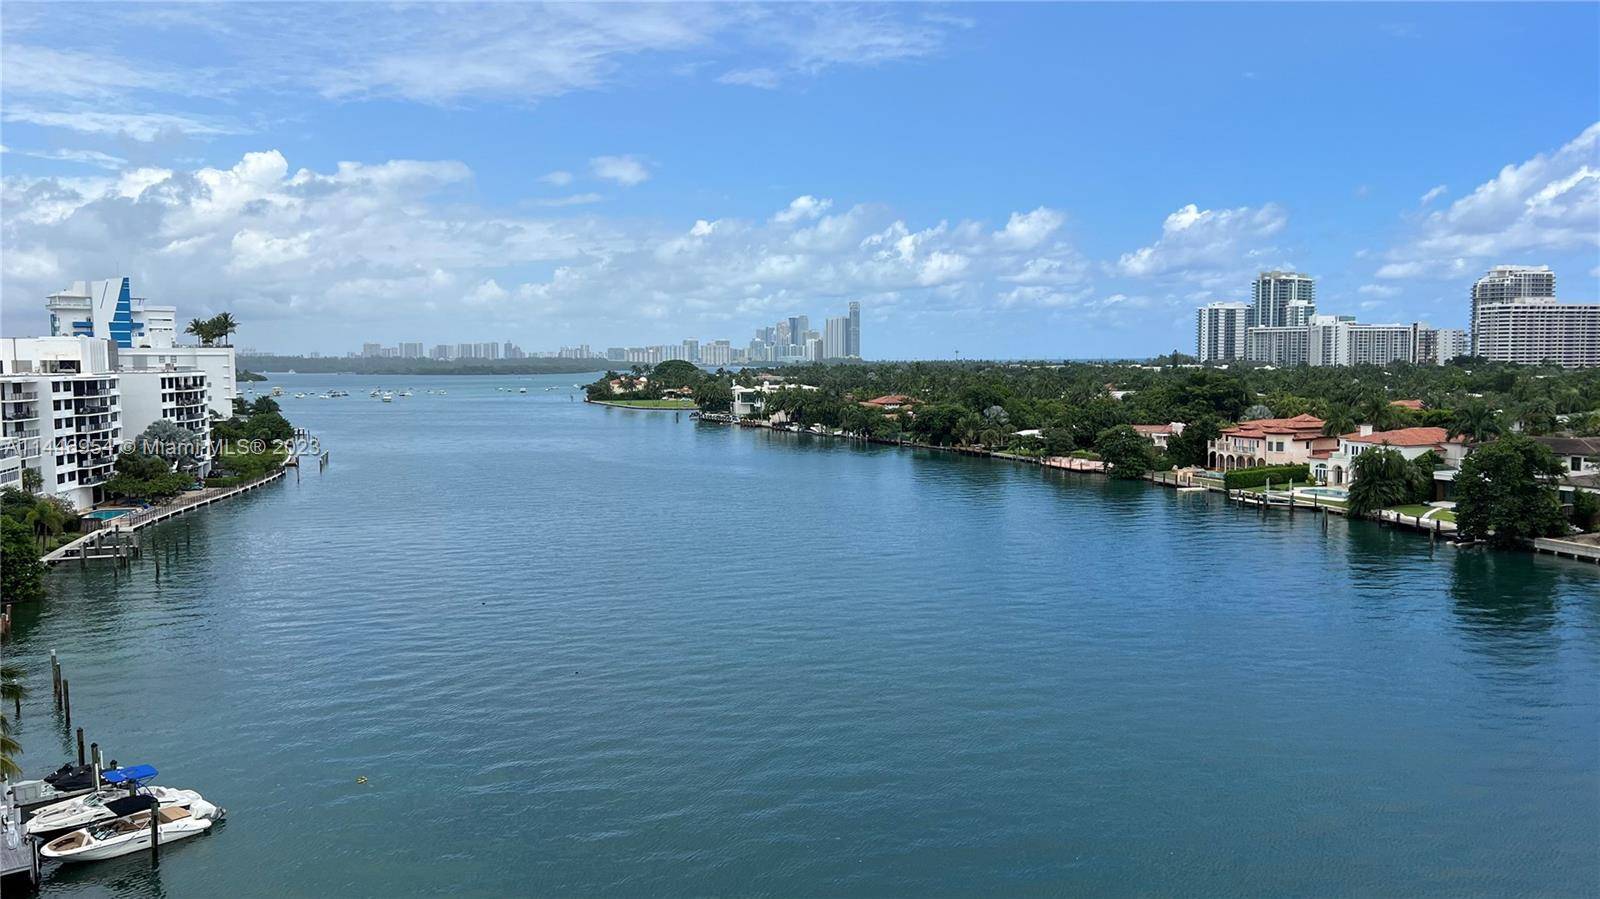 Beautiful 2 bedroom, 2 bathroom unit with a direct view of the canal and bay.